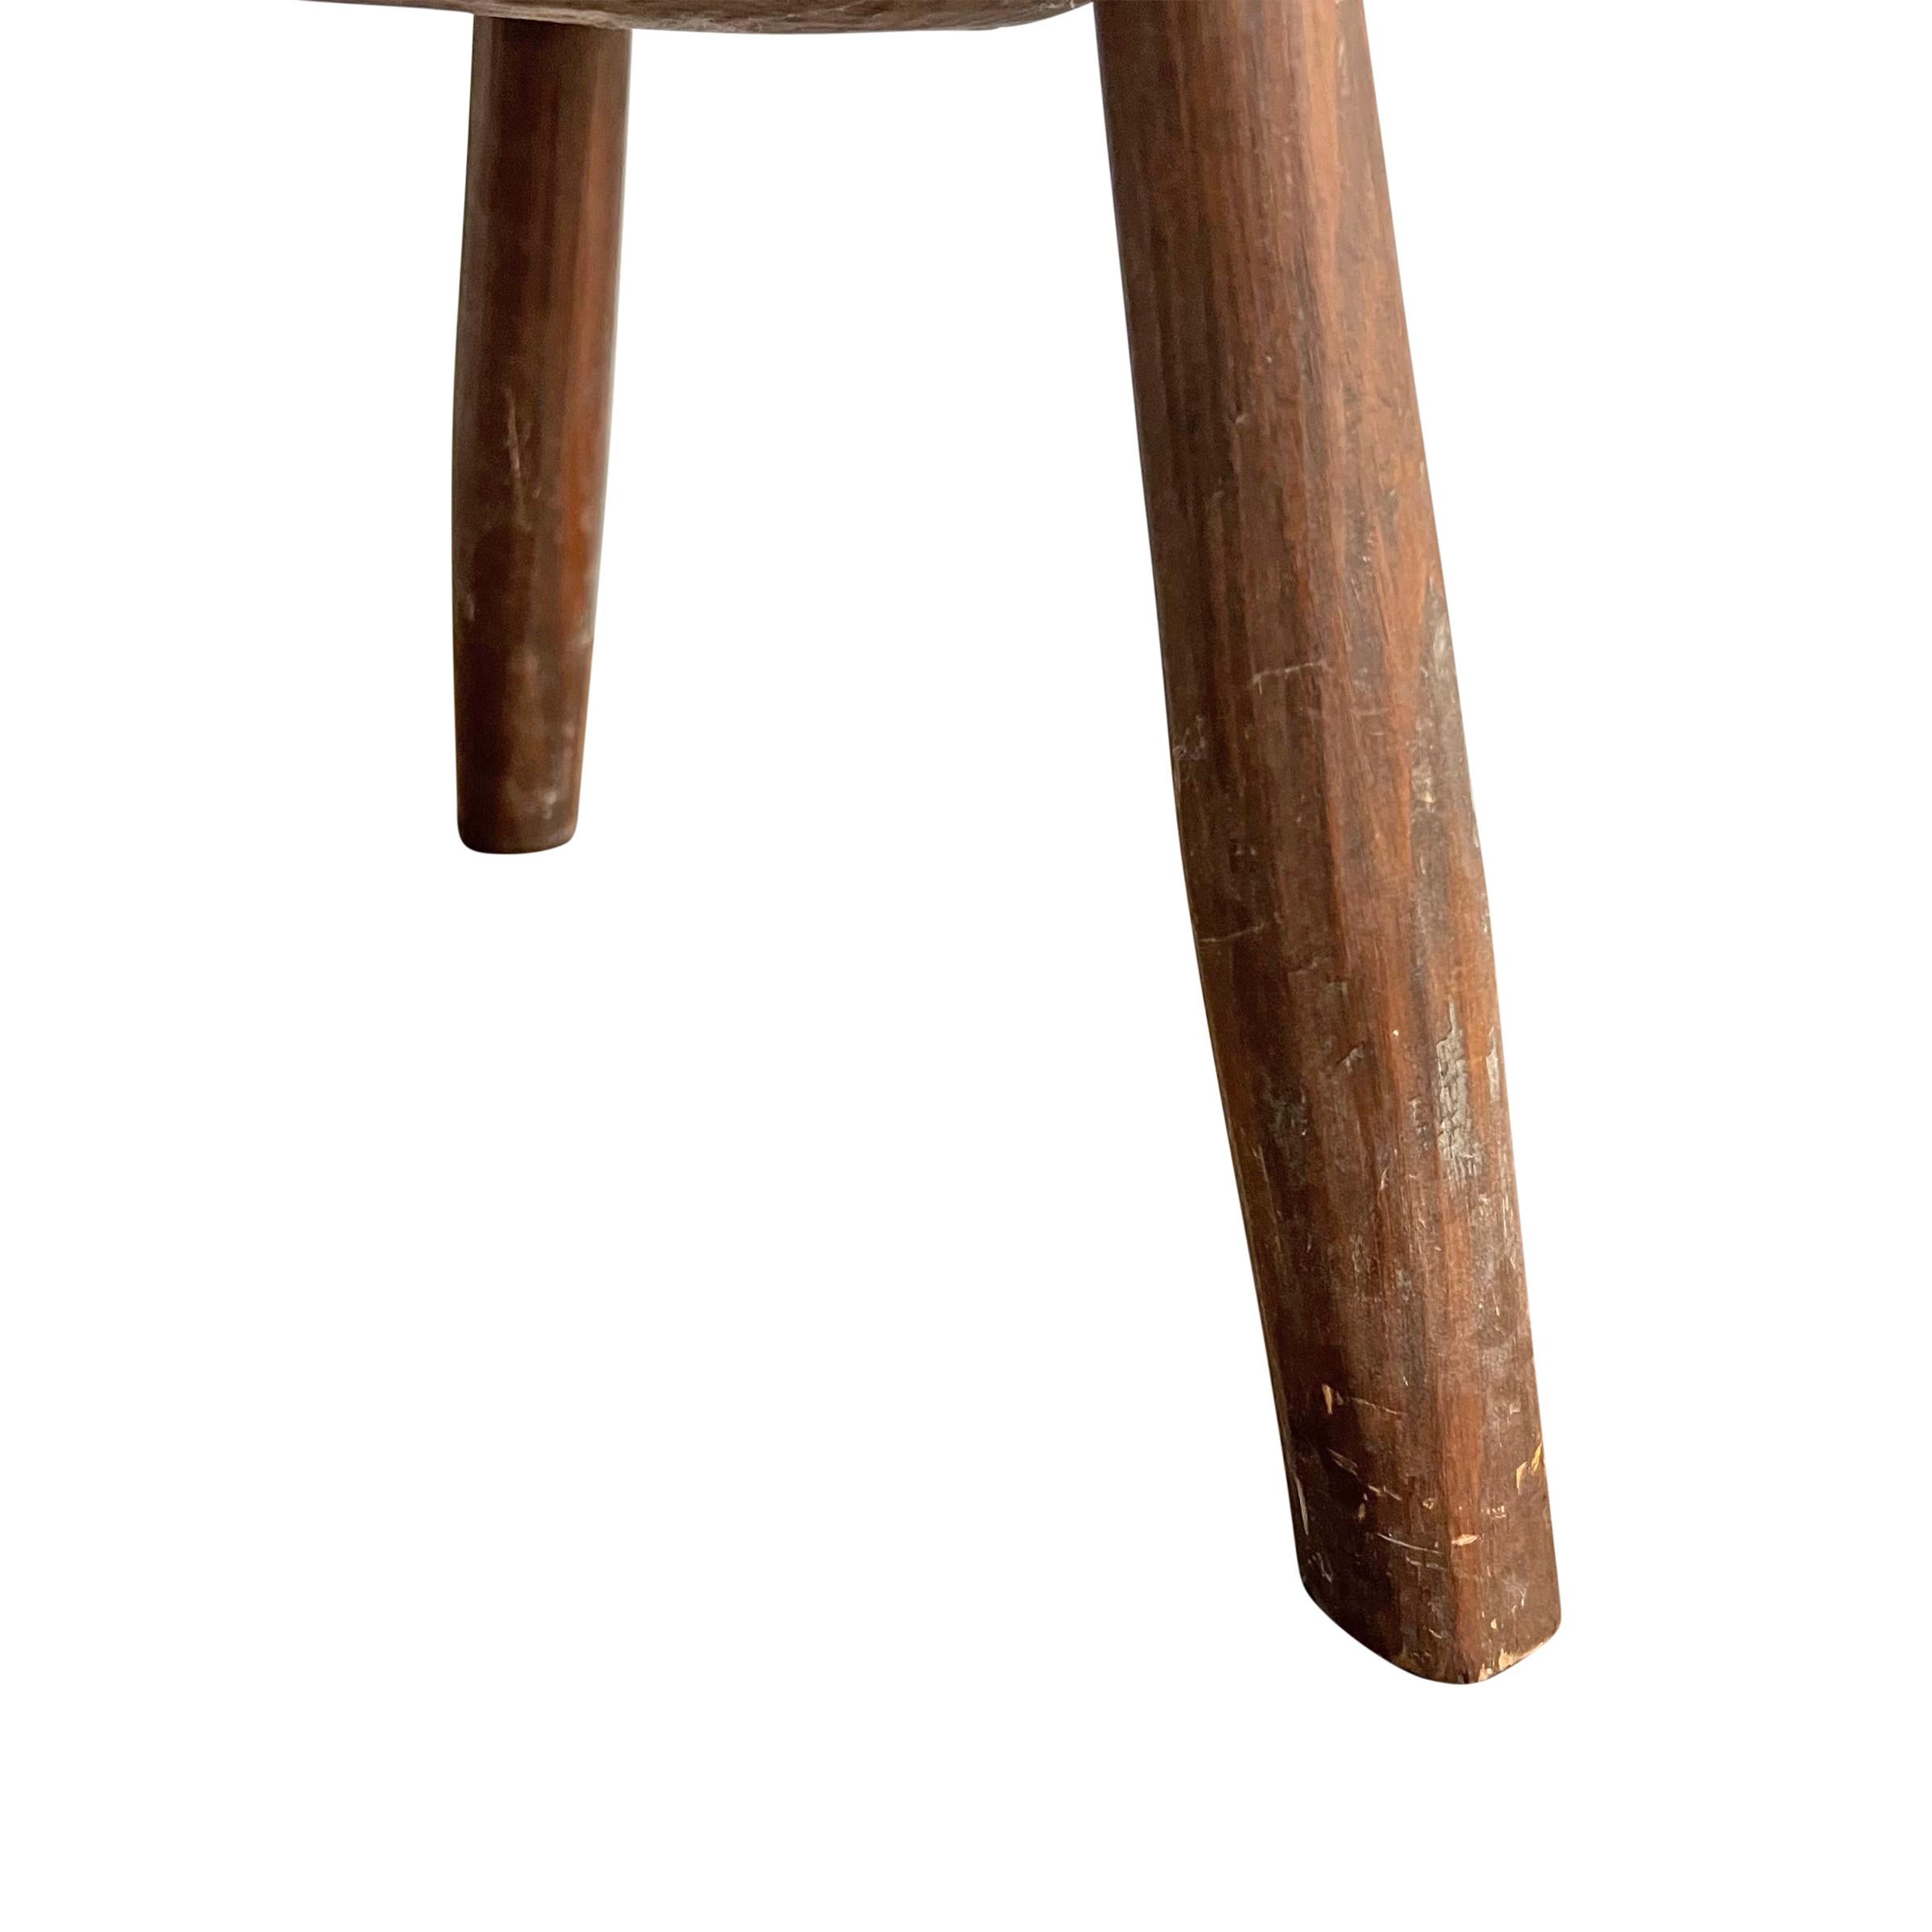 Early 20th Century American Primitive Milking Stool For Sale 5